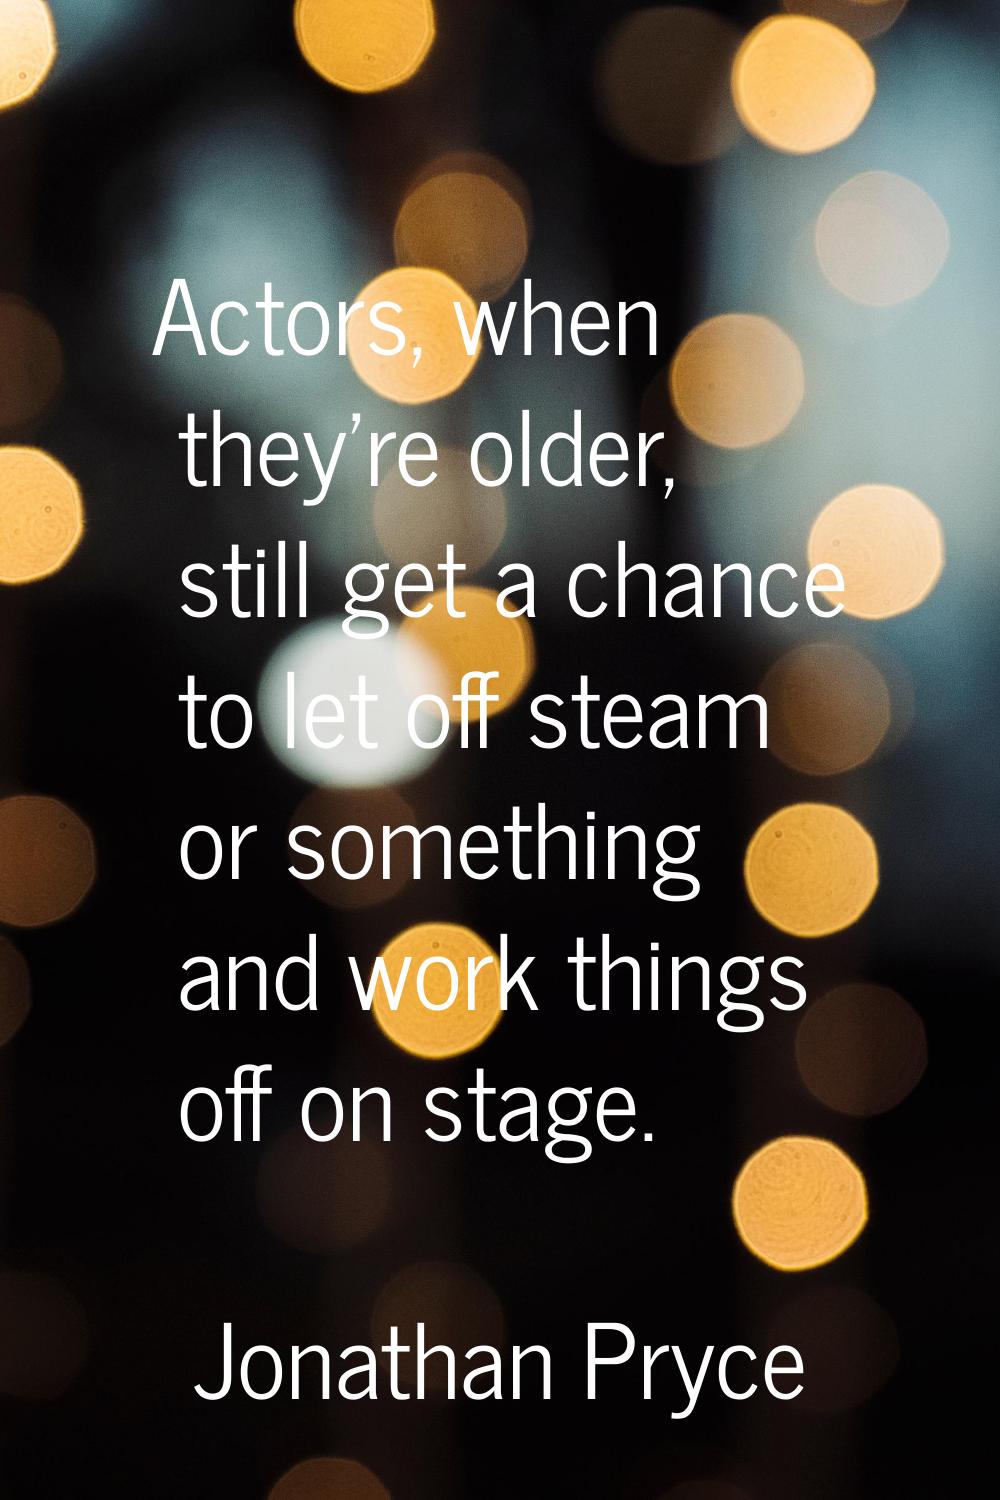 Actors, when they're older, still get a chance to let off steam or something and work things off on